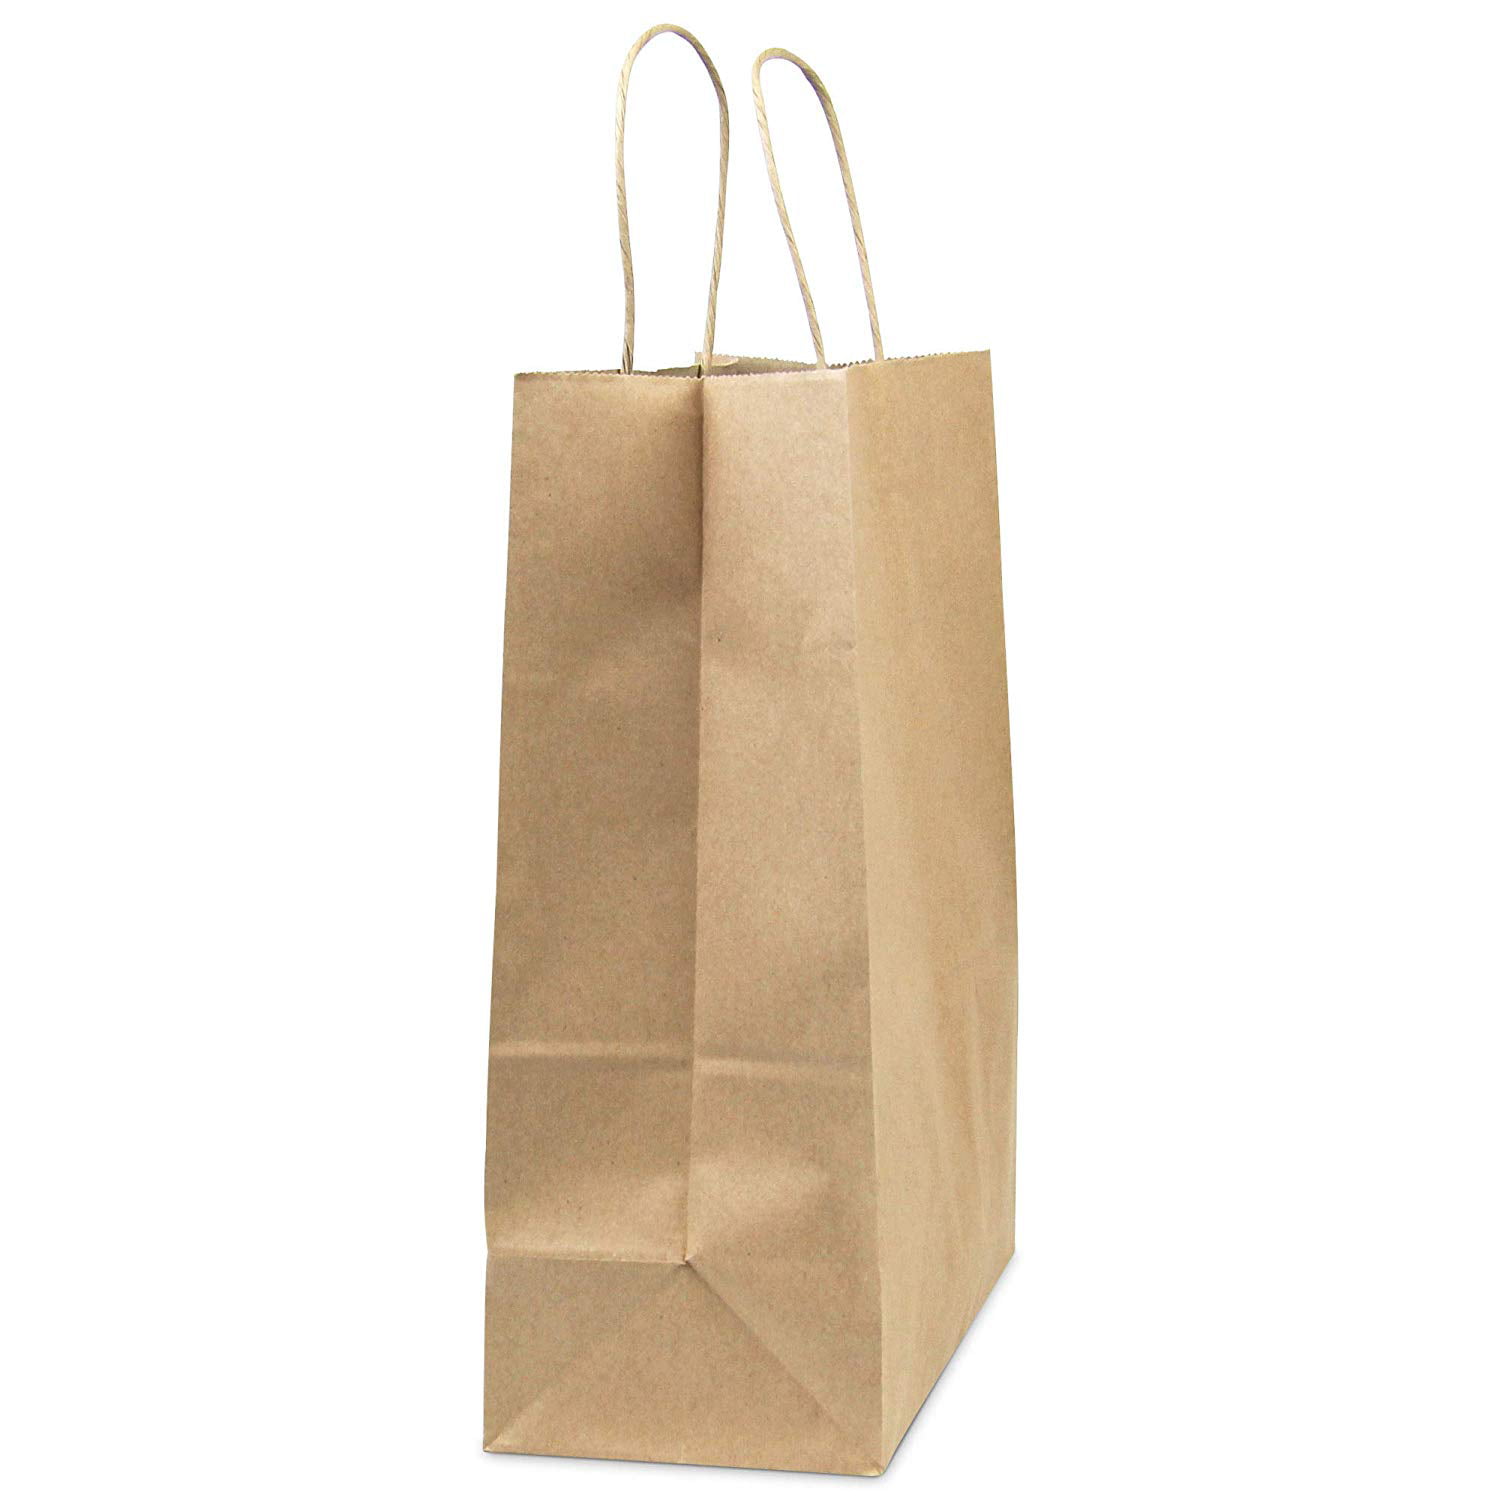 100 Retail Paper Shopping Bag 8x5x10 KRAFT with Rope Handle Plain Natural 